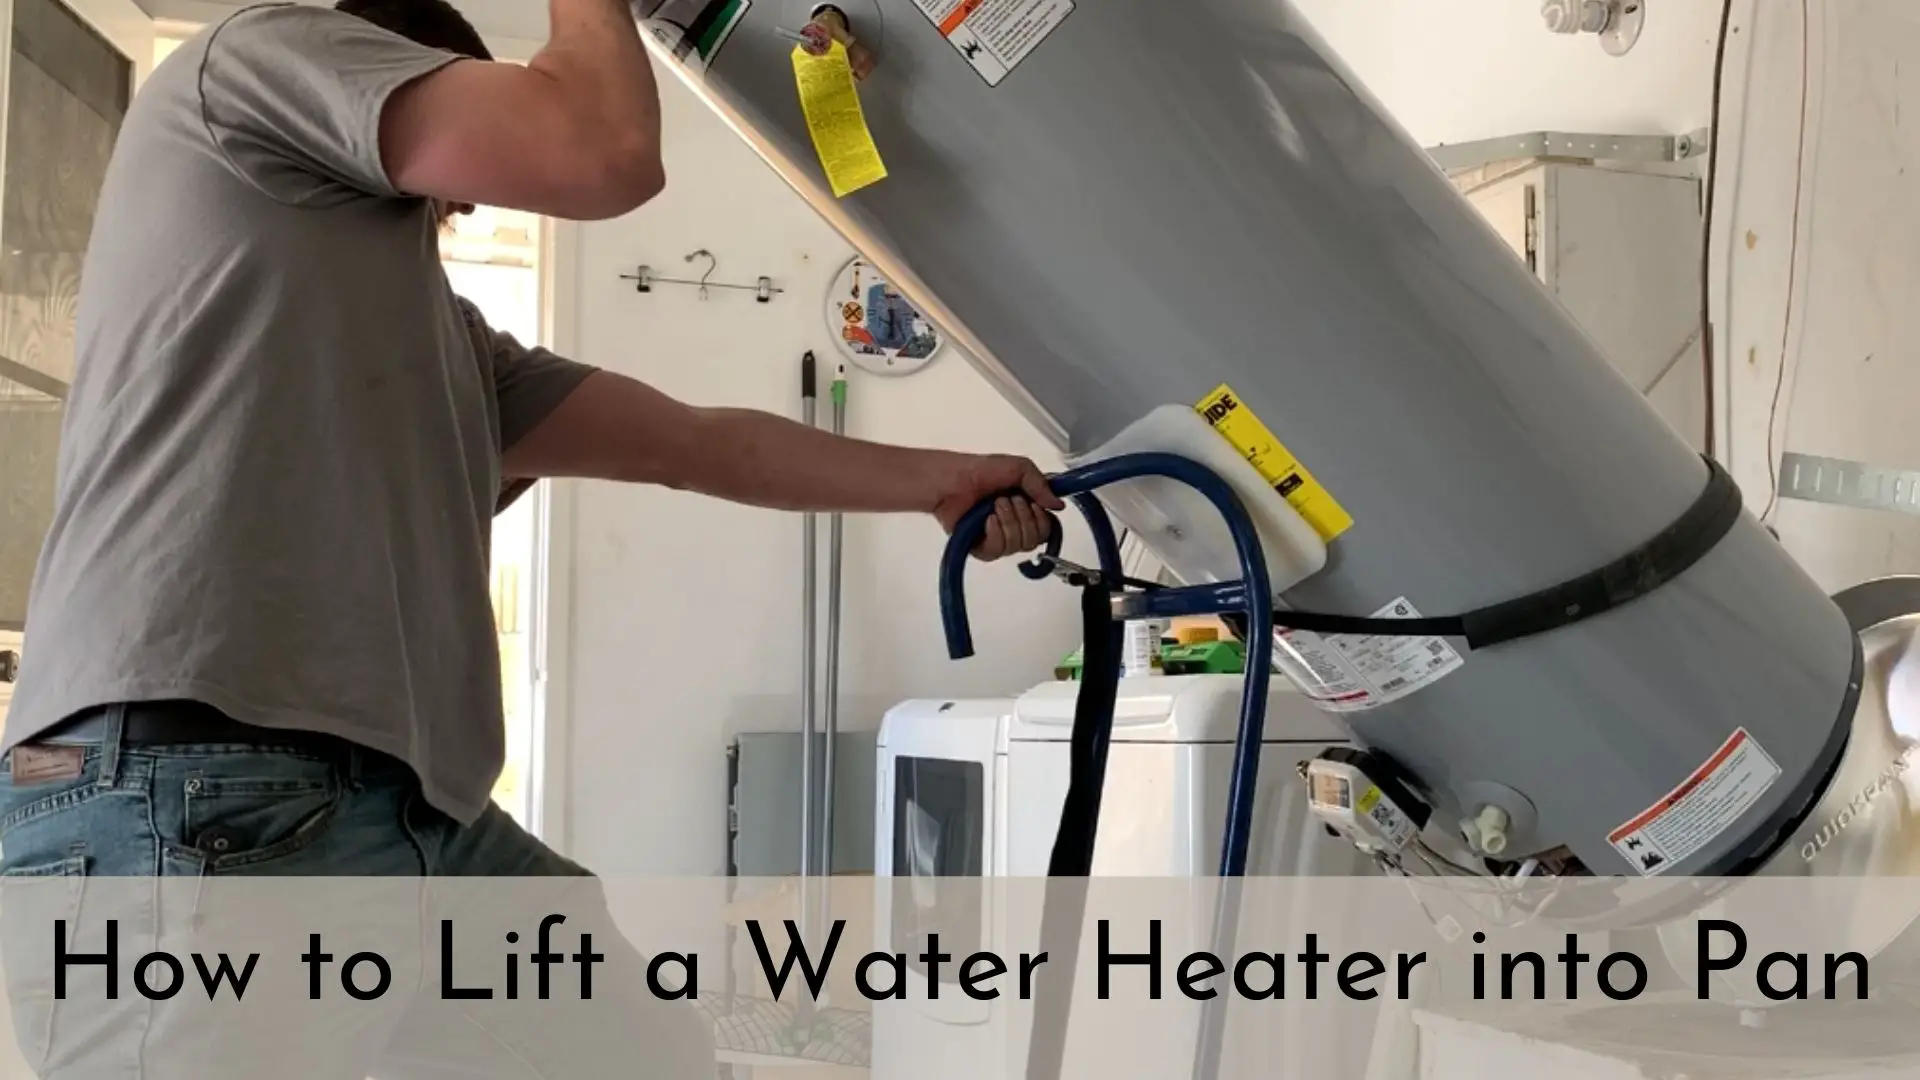 How to Lift a Water Heater into Pan